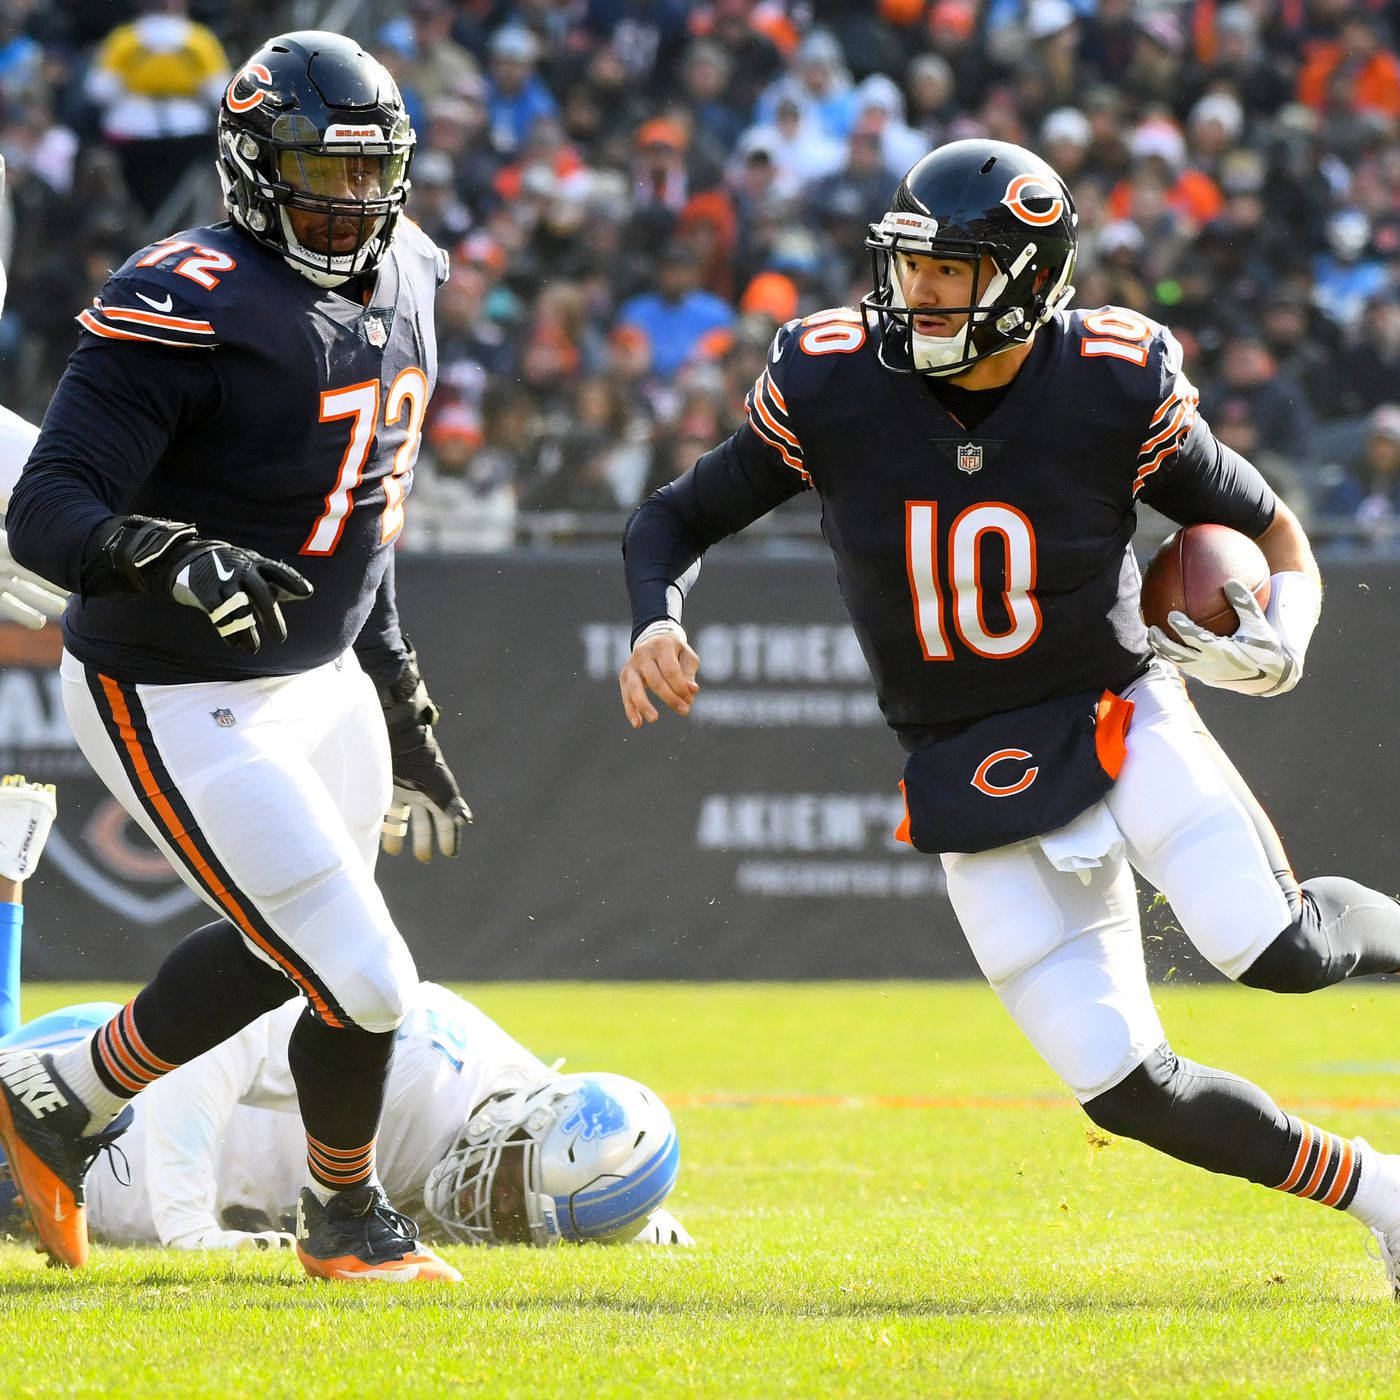 Rookie contract hero: Can the Chicago Bears trust QB Mitchell